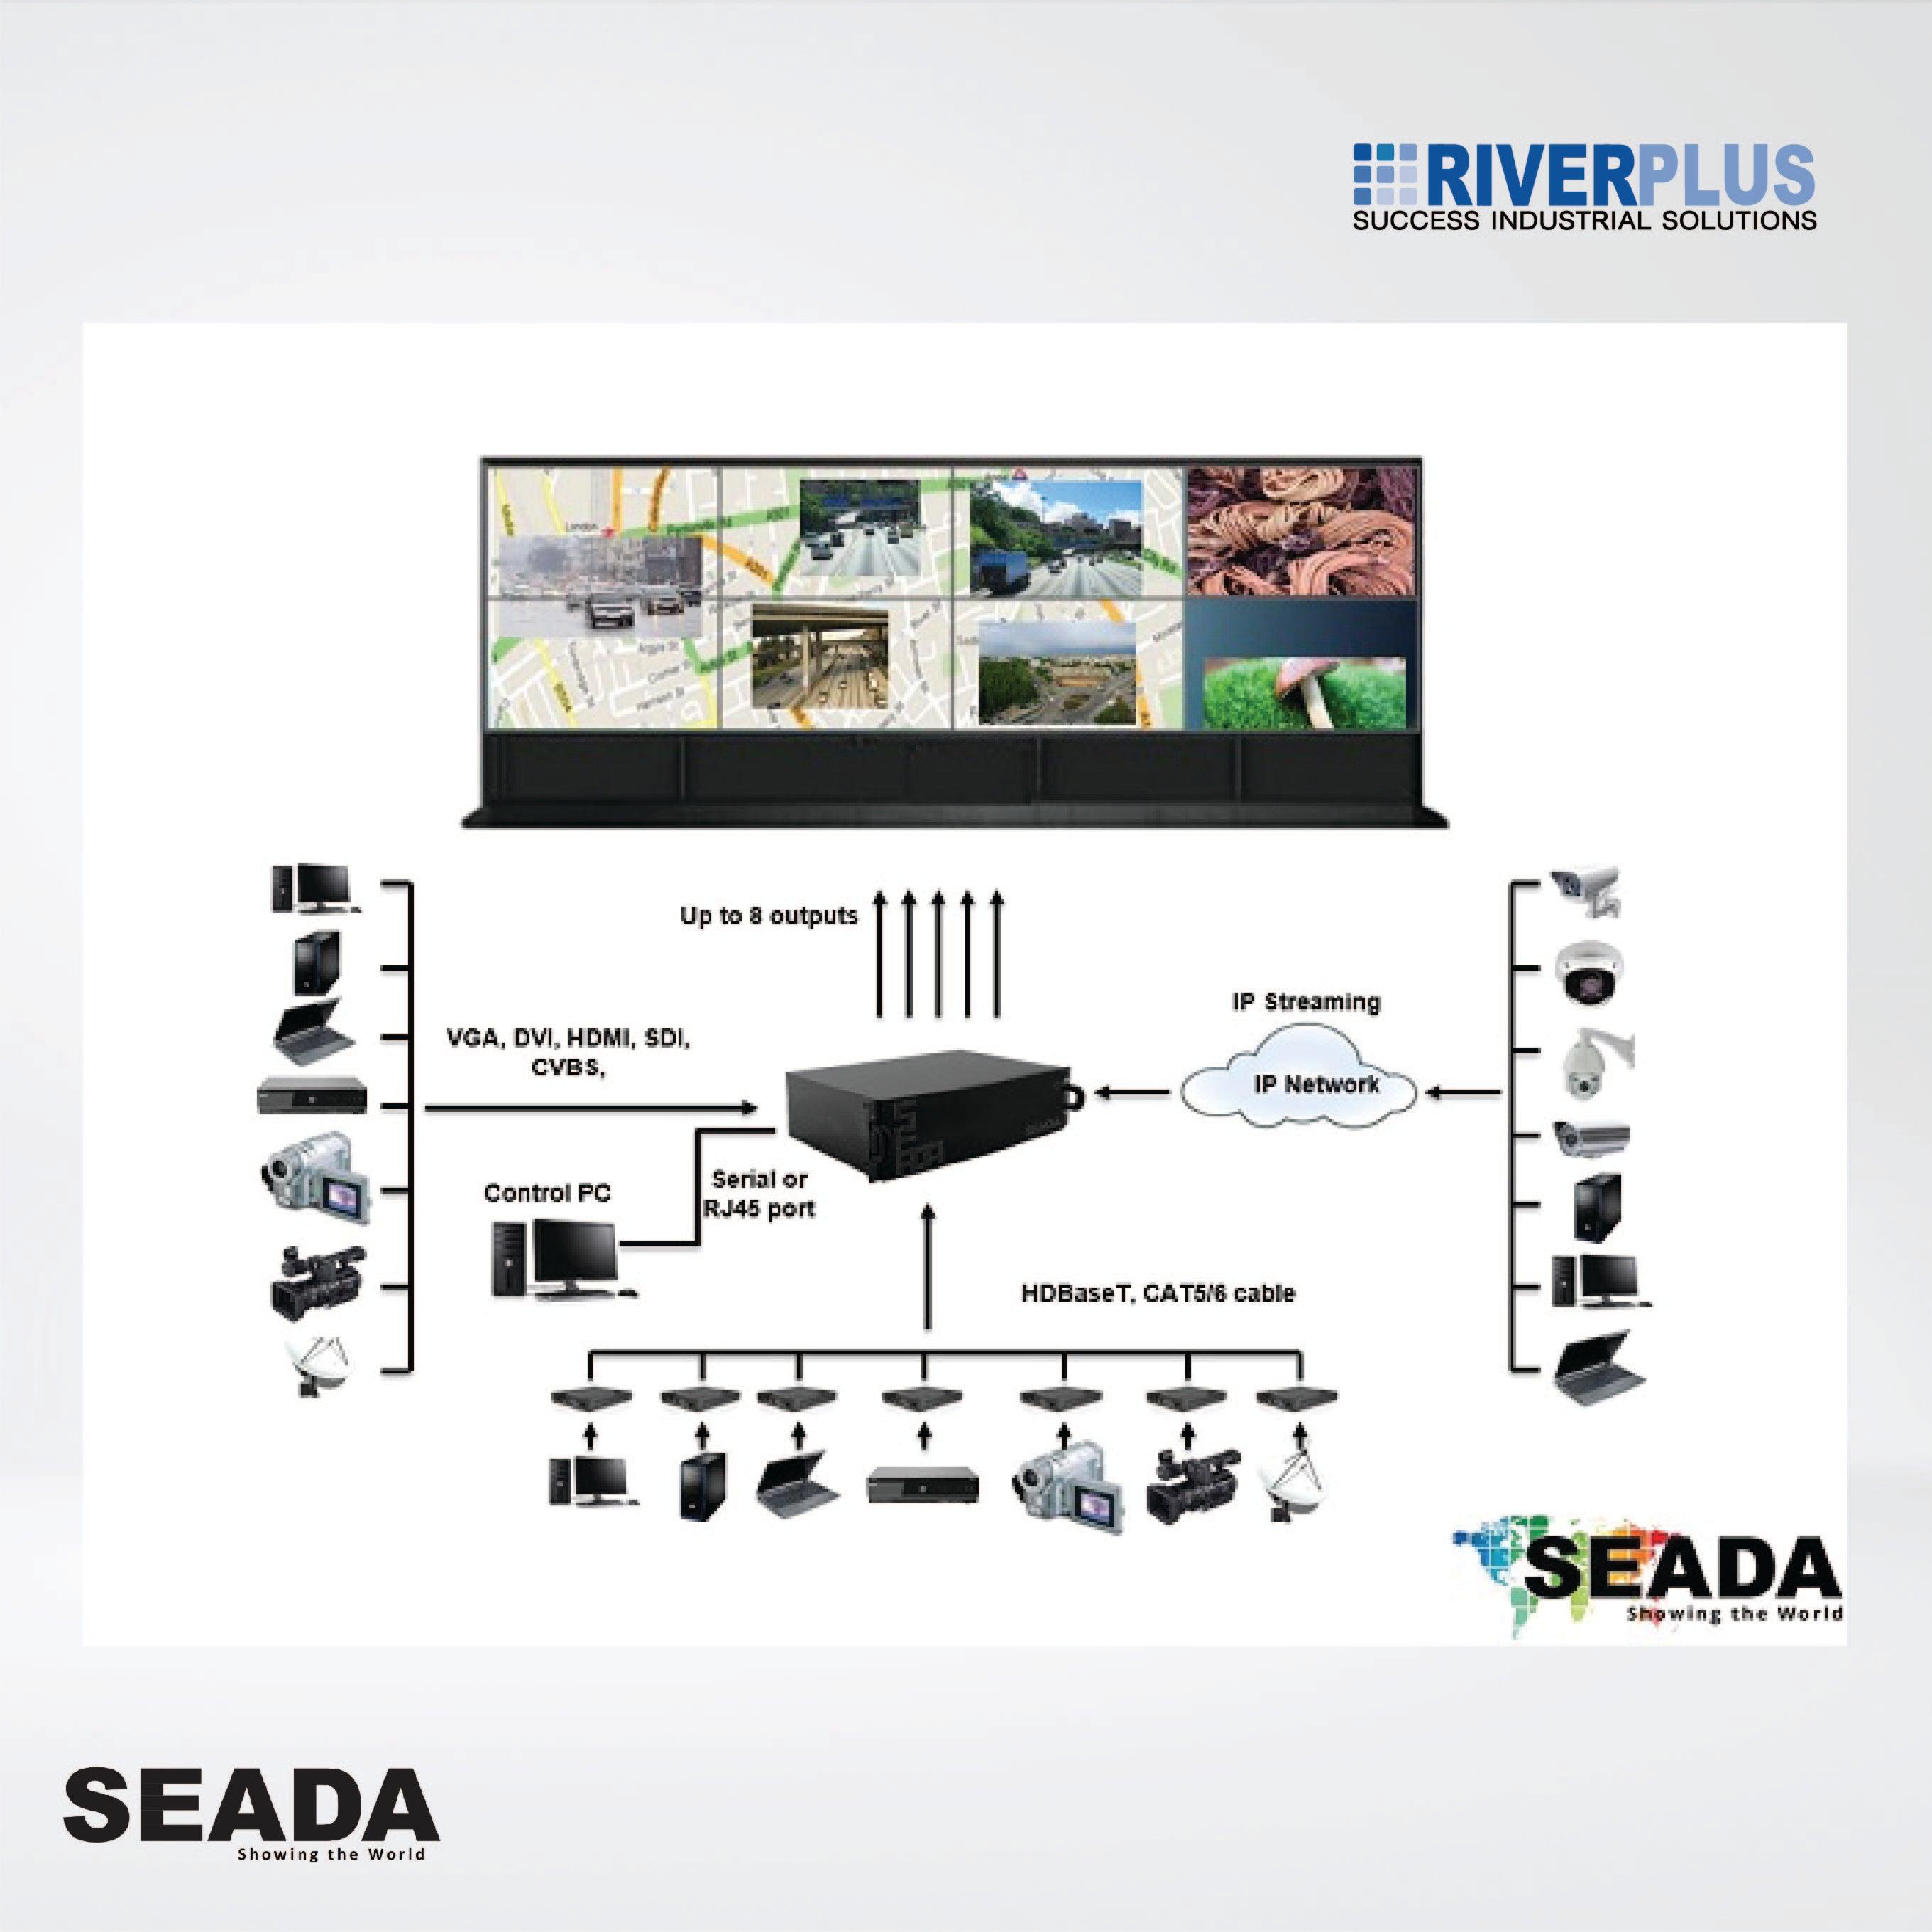 SW2008 Small size of video wall displays in a 24/7 operational environment - Riverplus